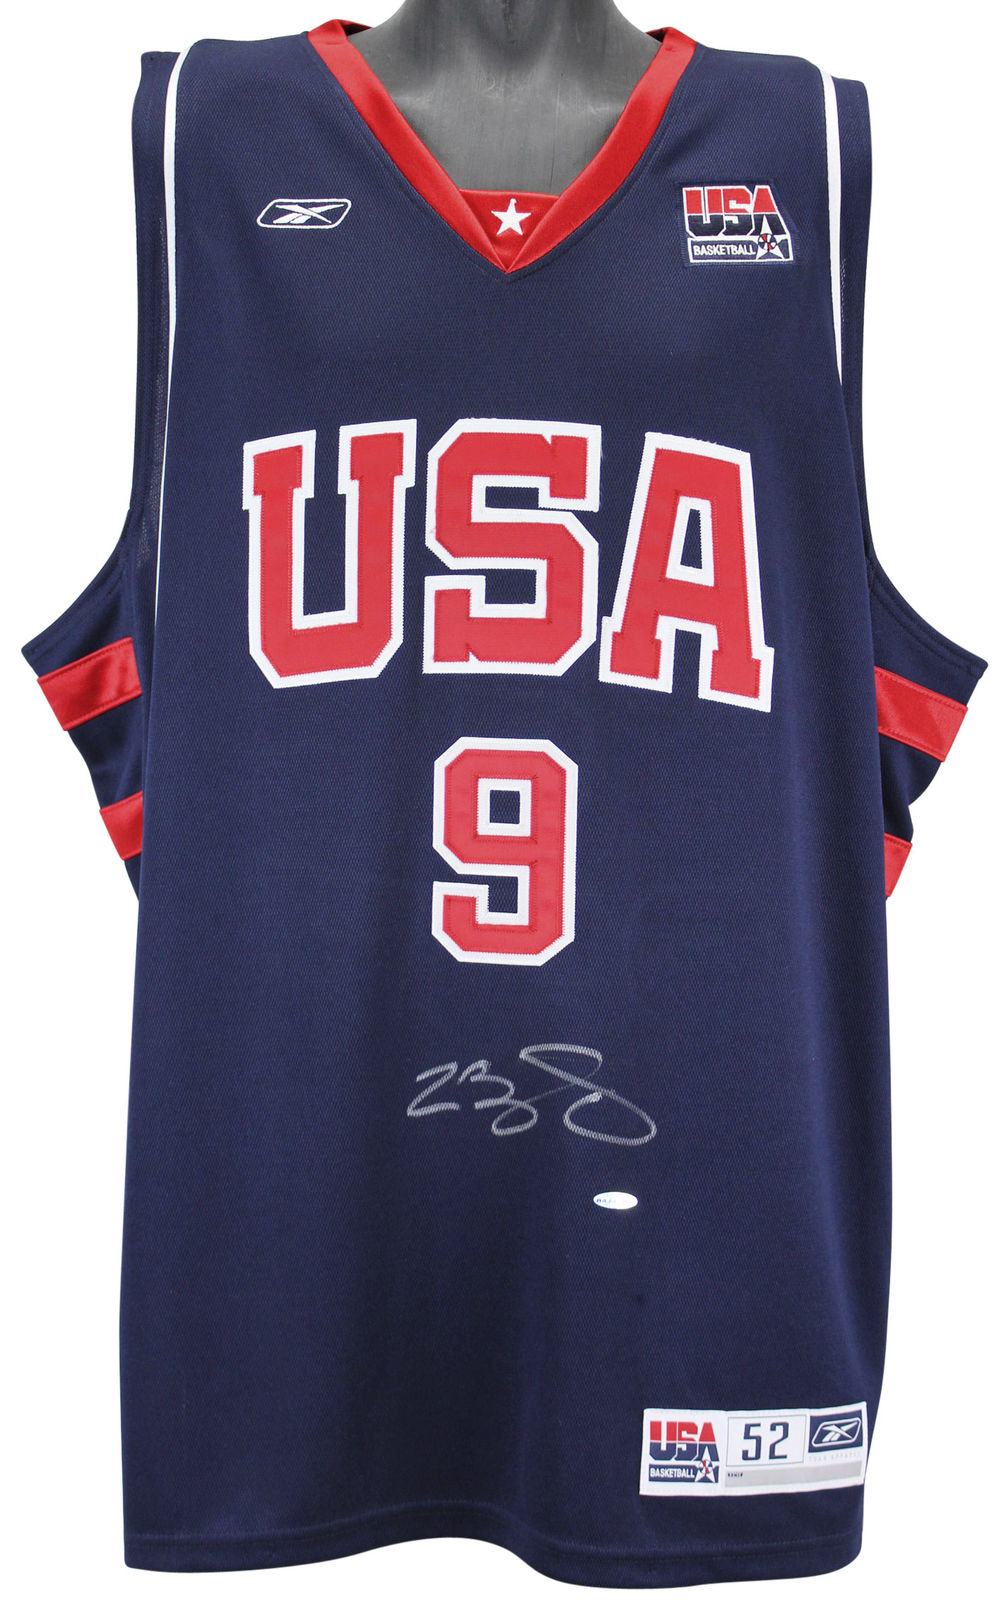 LeBron James Rare Signed Official 